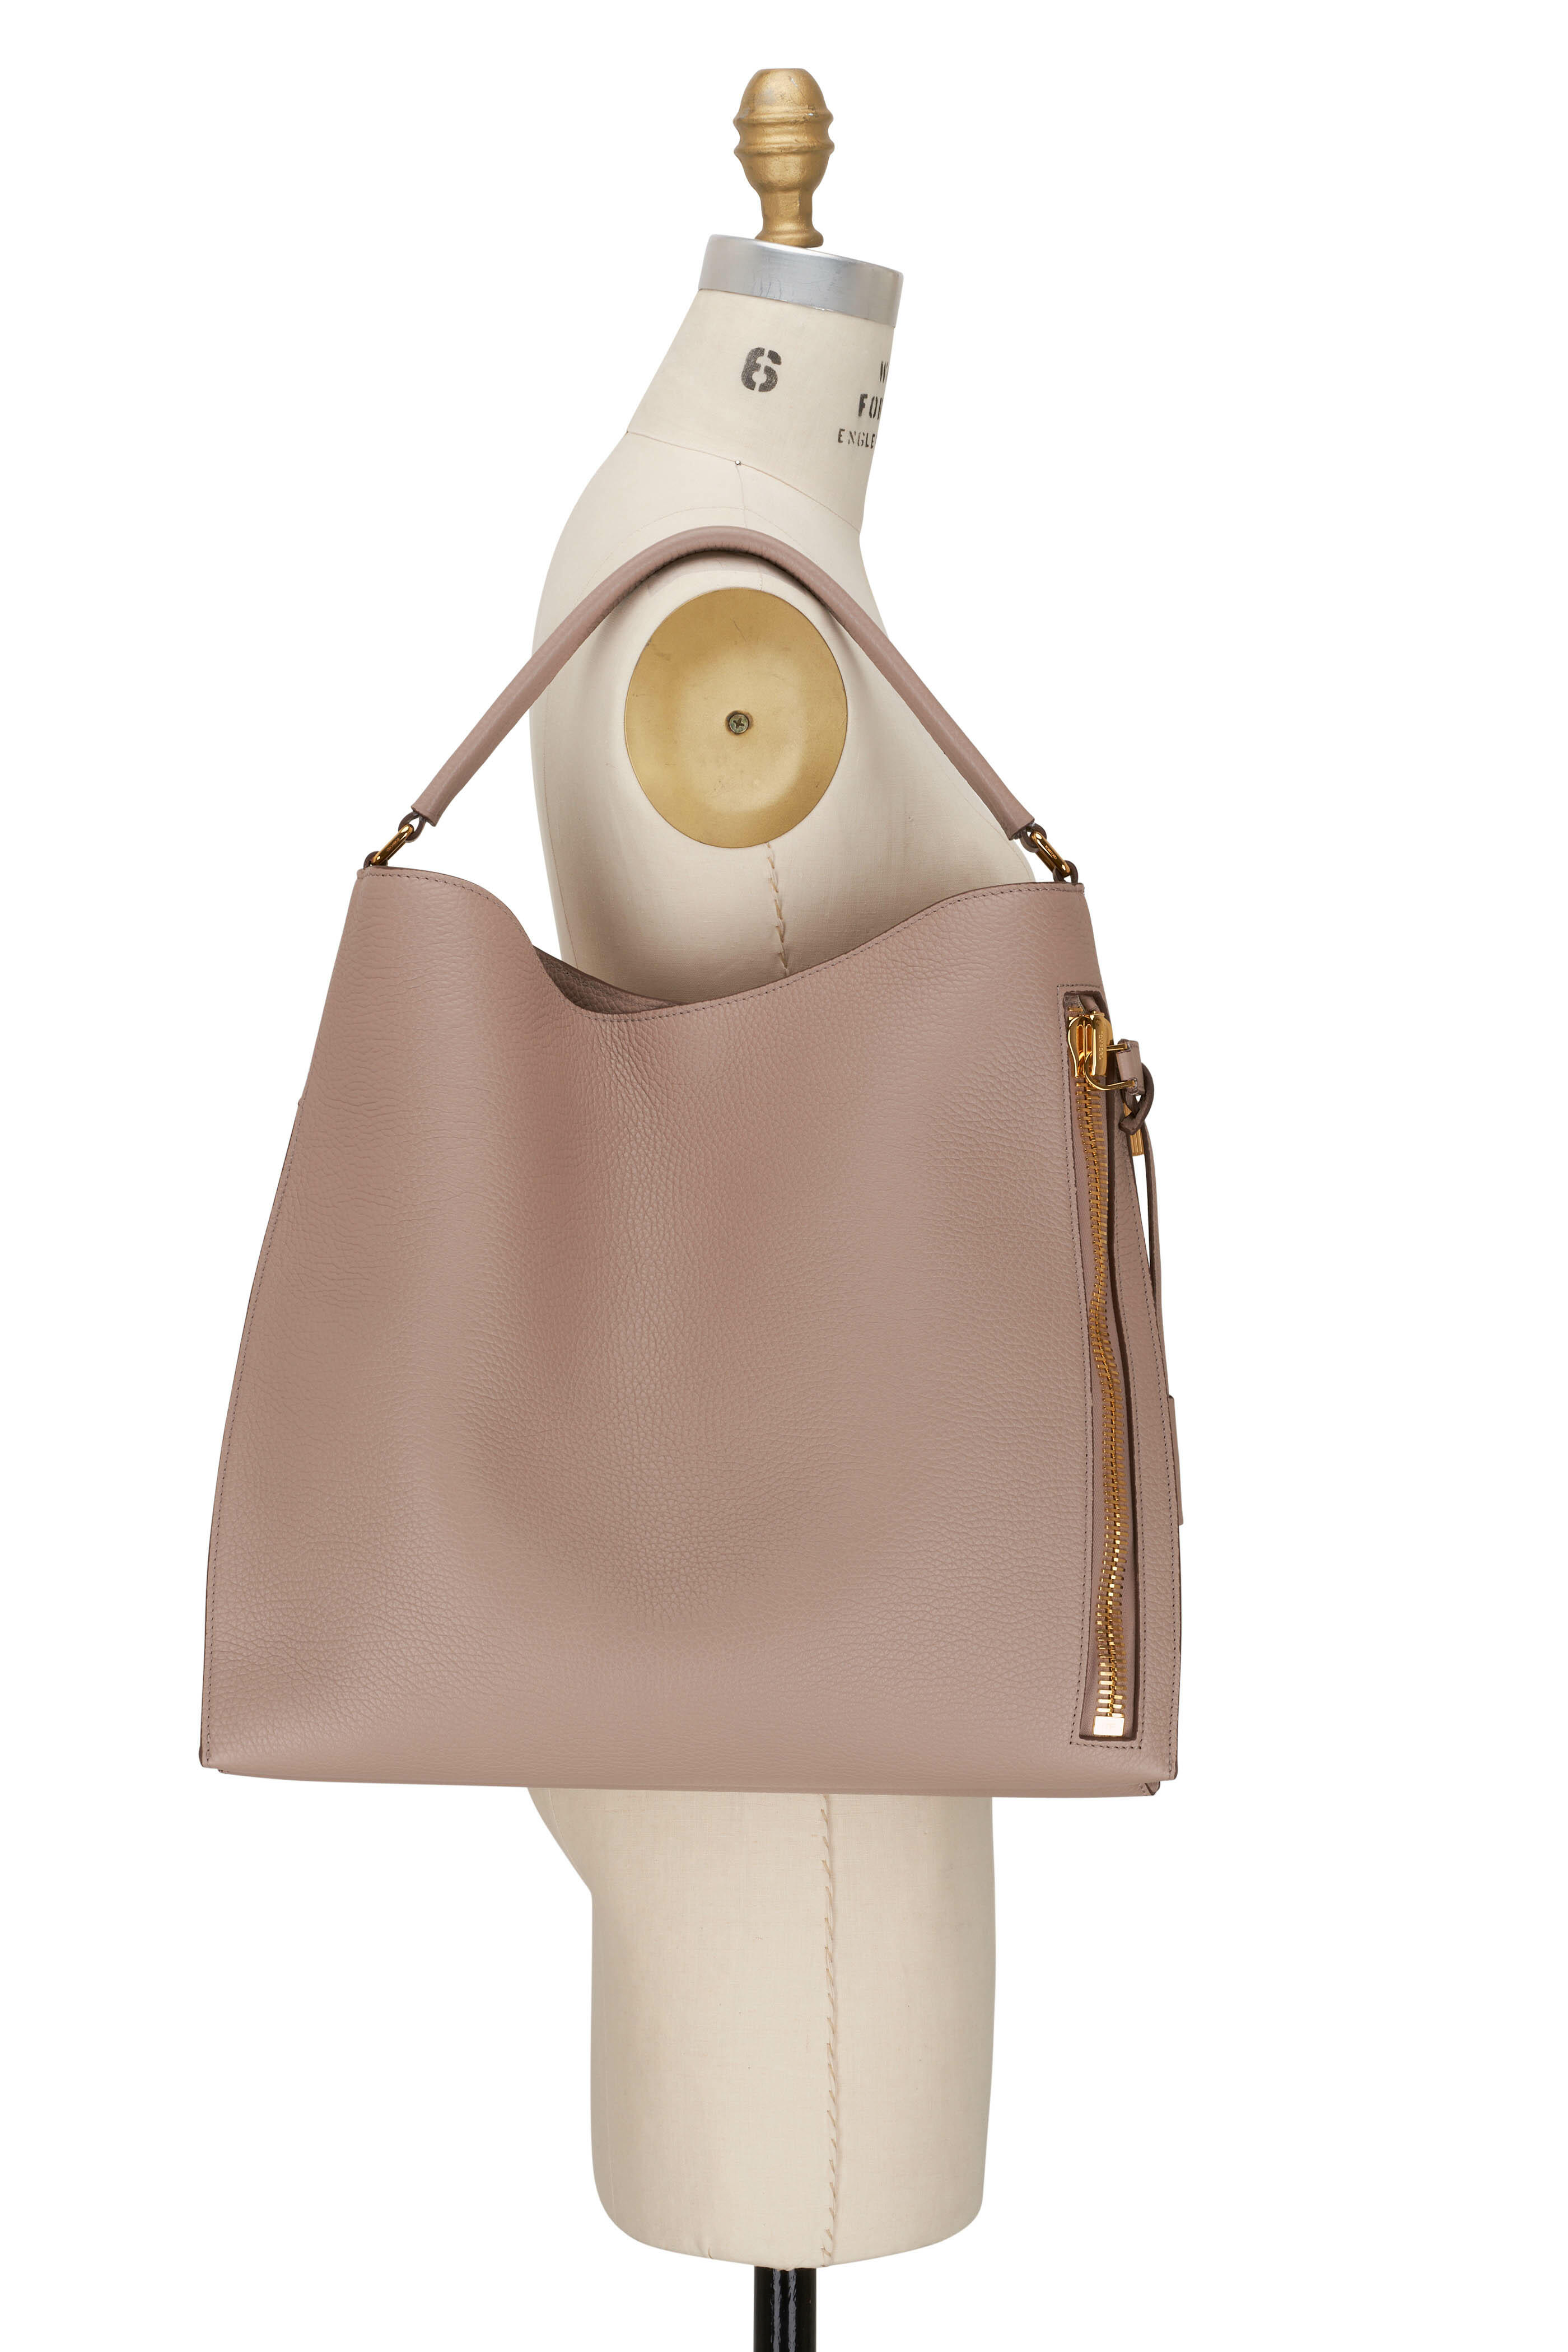 Tom Ford Women's Large Alix Leather Hobo Bag - Silk Taupe